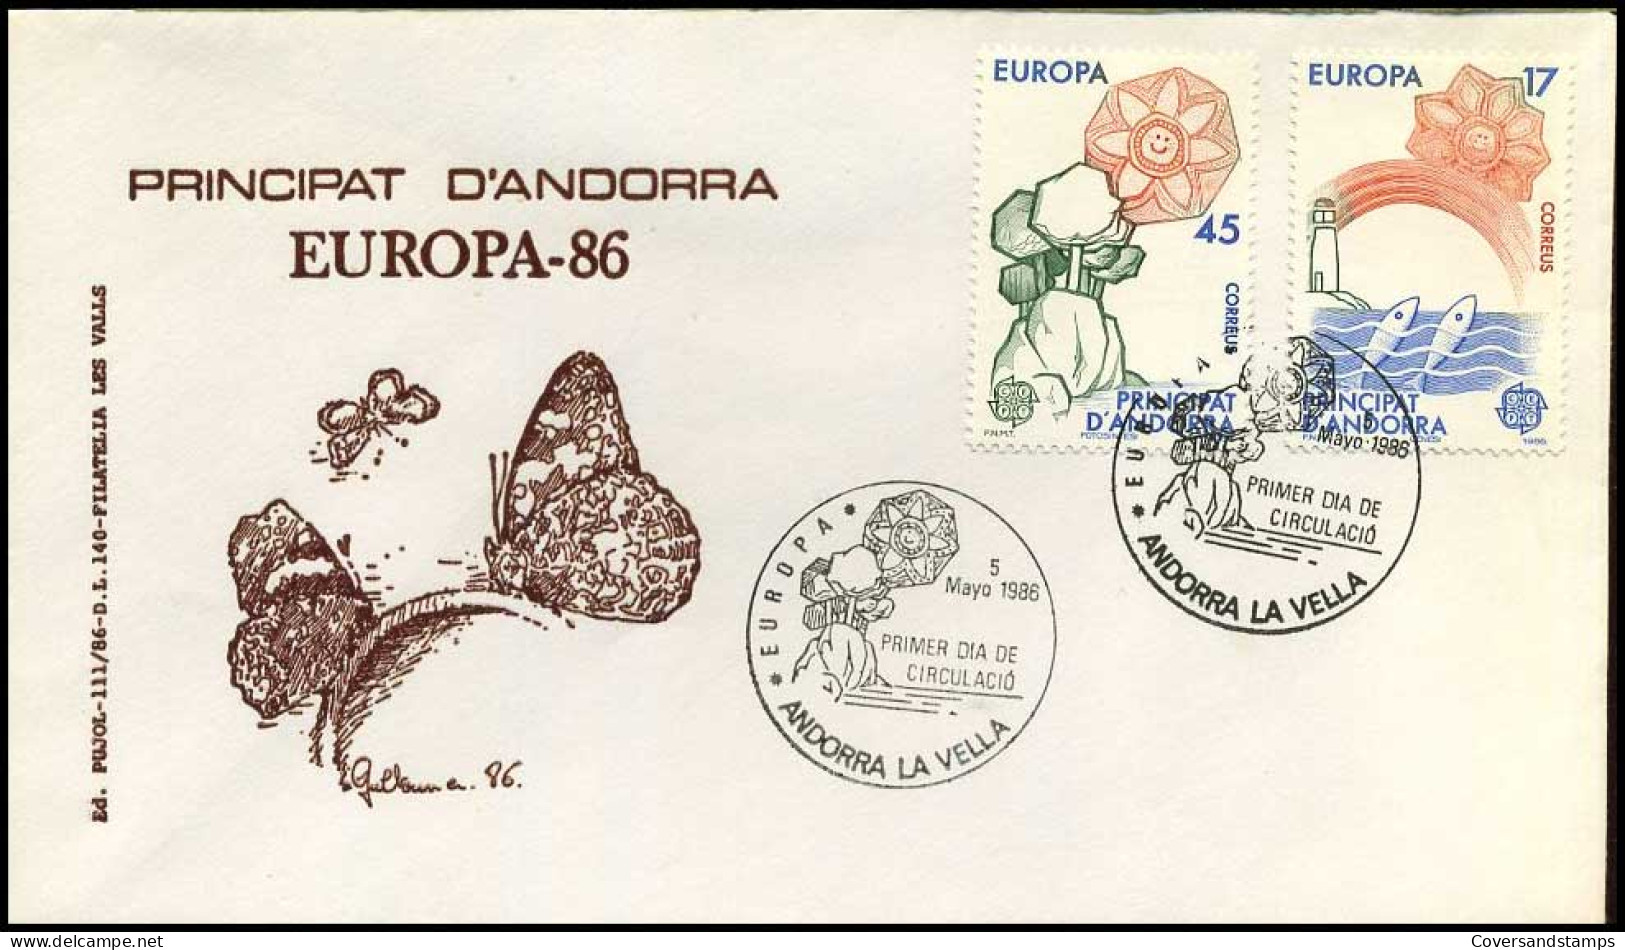 Andorra - FDC - Europa CEPT 1986 - Covers & Documents